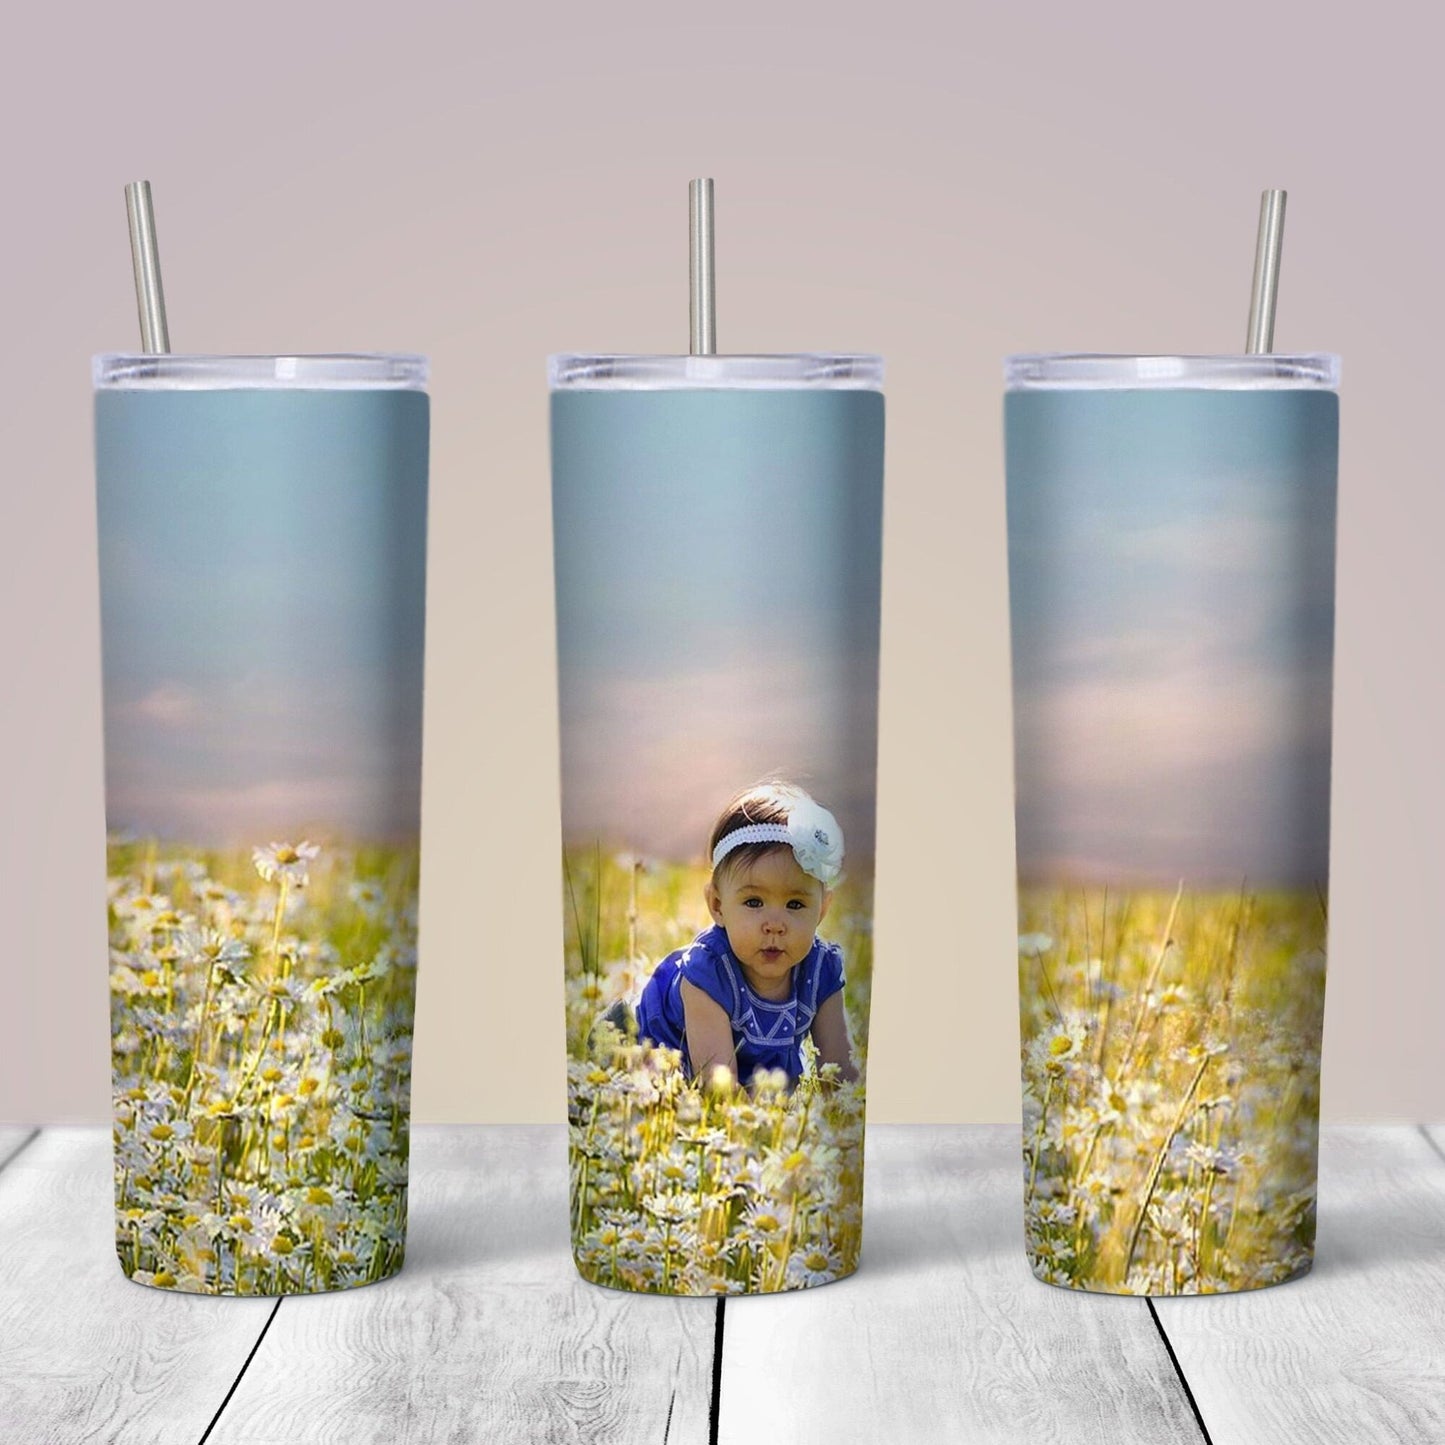 Personalised 20oz White Stainless Steel Skinny Tumbler with Lid and Straw